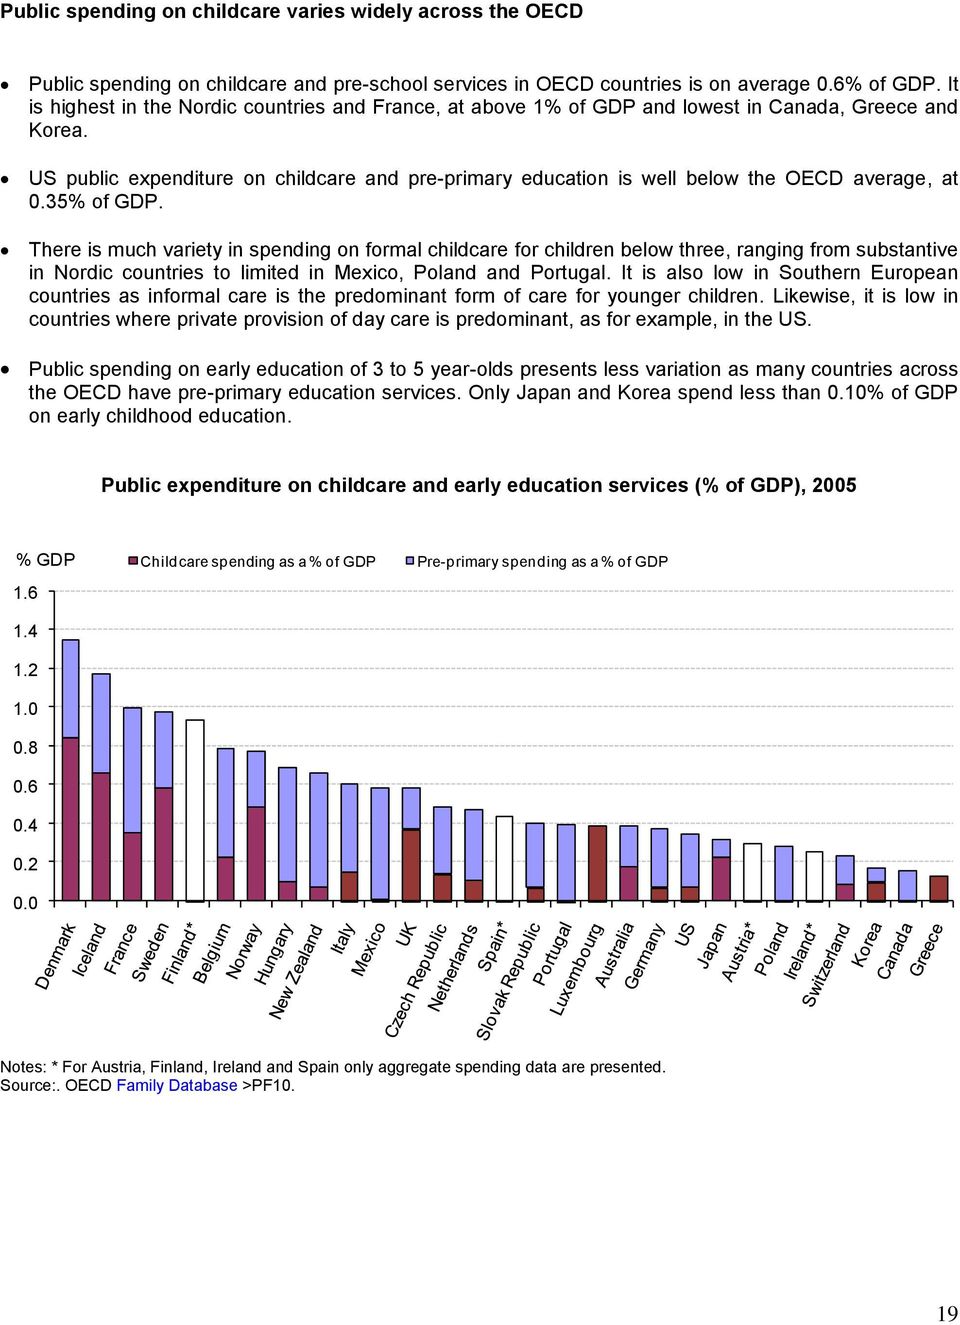 US public expenditure on childcare and pre-primary education is well below the OECD average, at.35% of GDP.